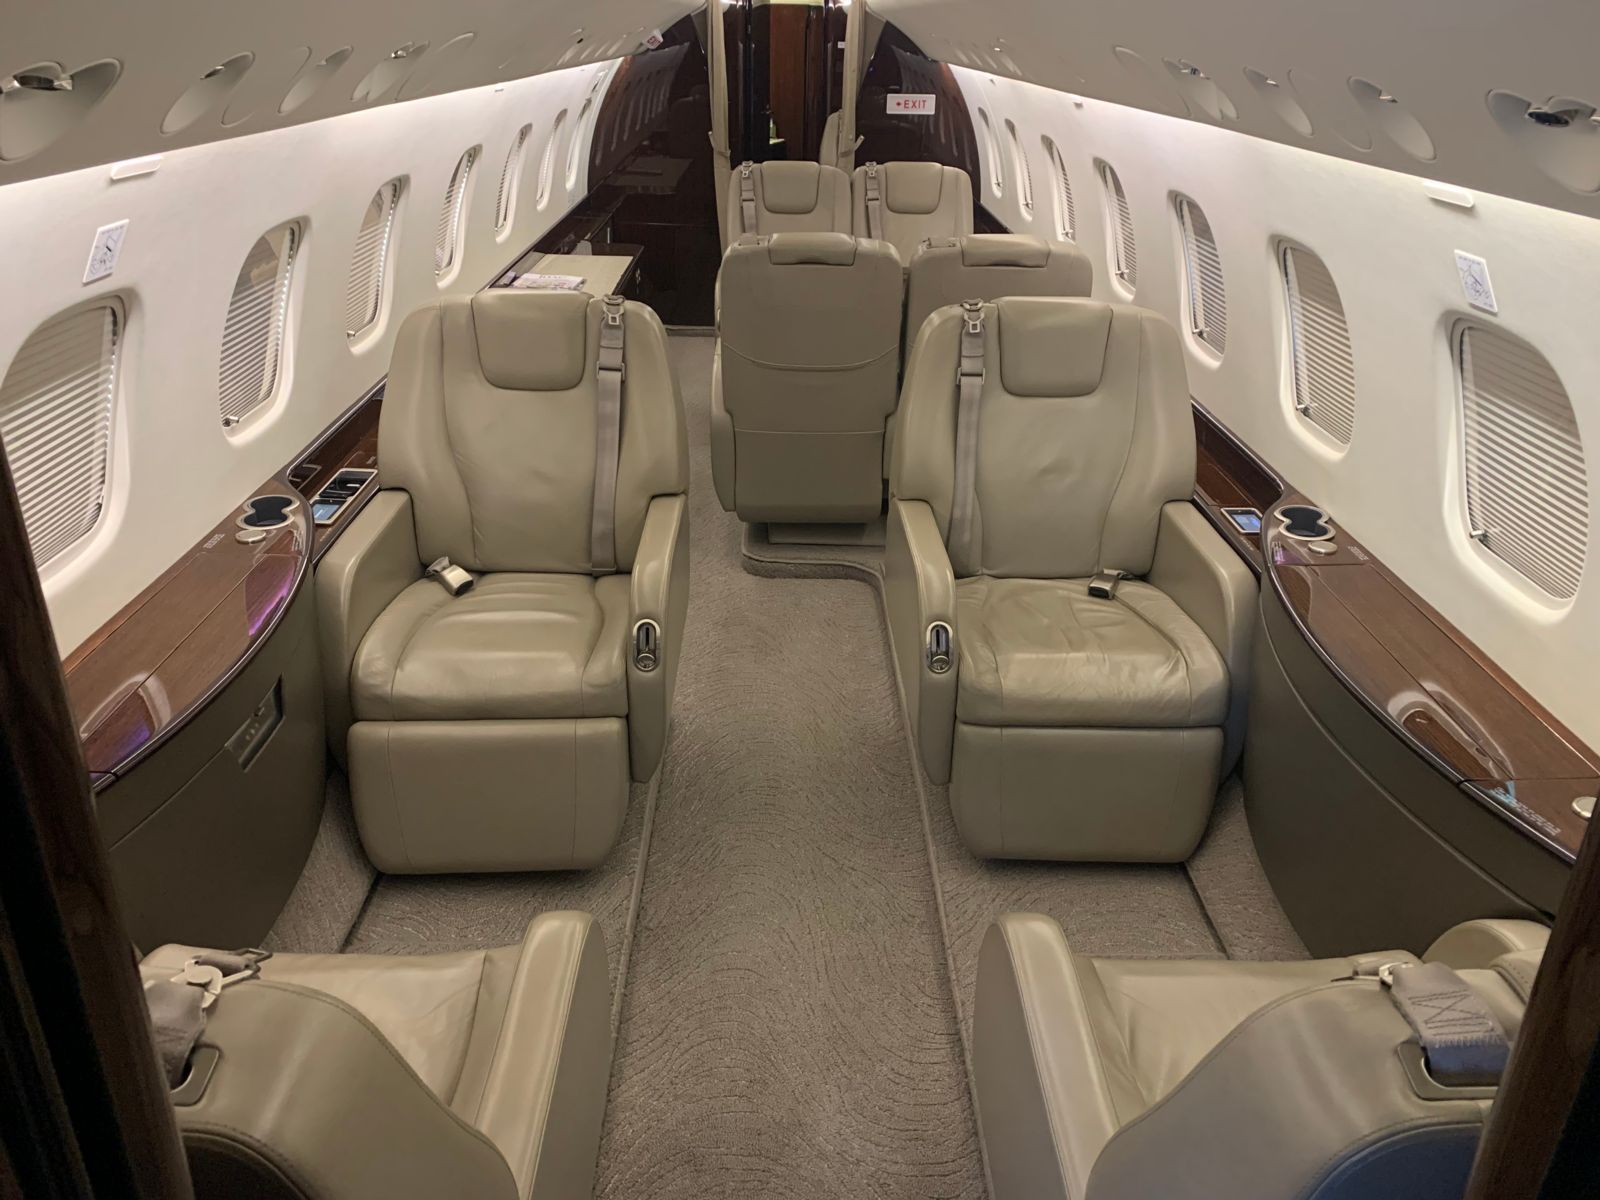 Embraer Legacy 650  S/N 14501167 for sale | gallery image: /userfiles/files/photo%20nov%2022%202022%2C%2011%2048%2054%20am.jpg